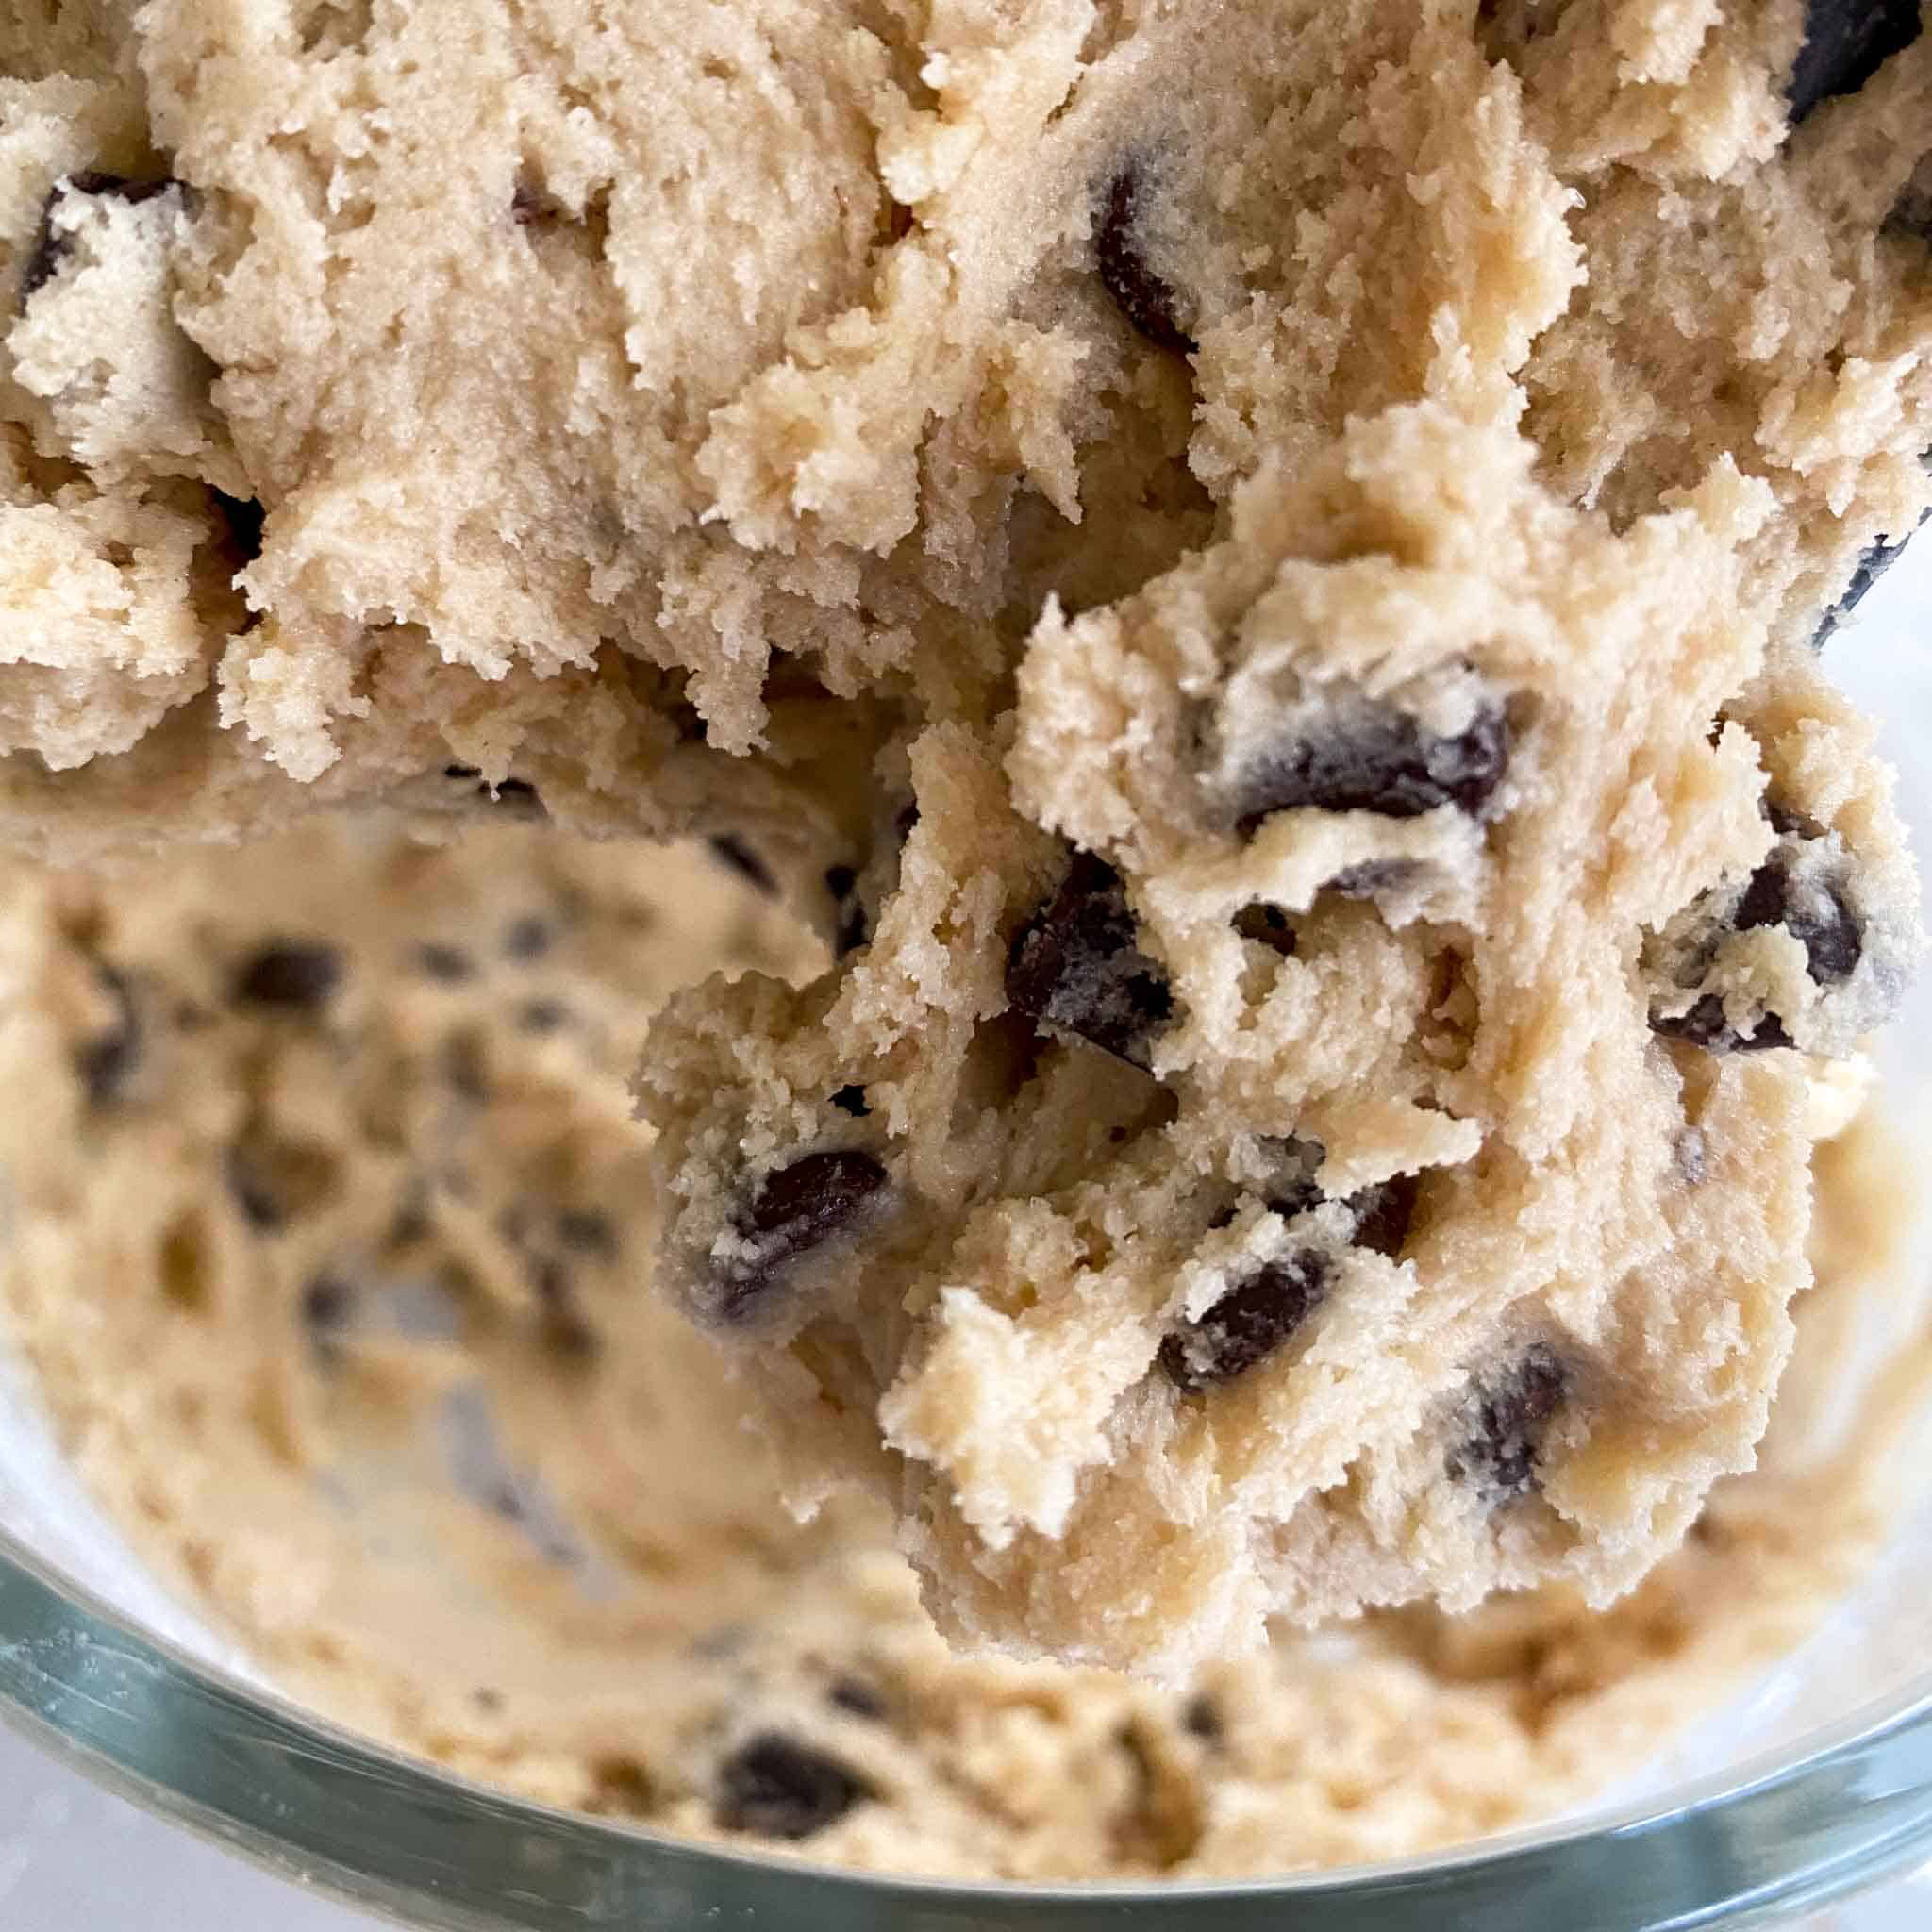 A close up view of the chocolate chip cookie dough without butter.